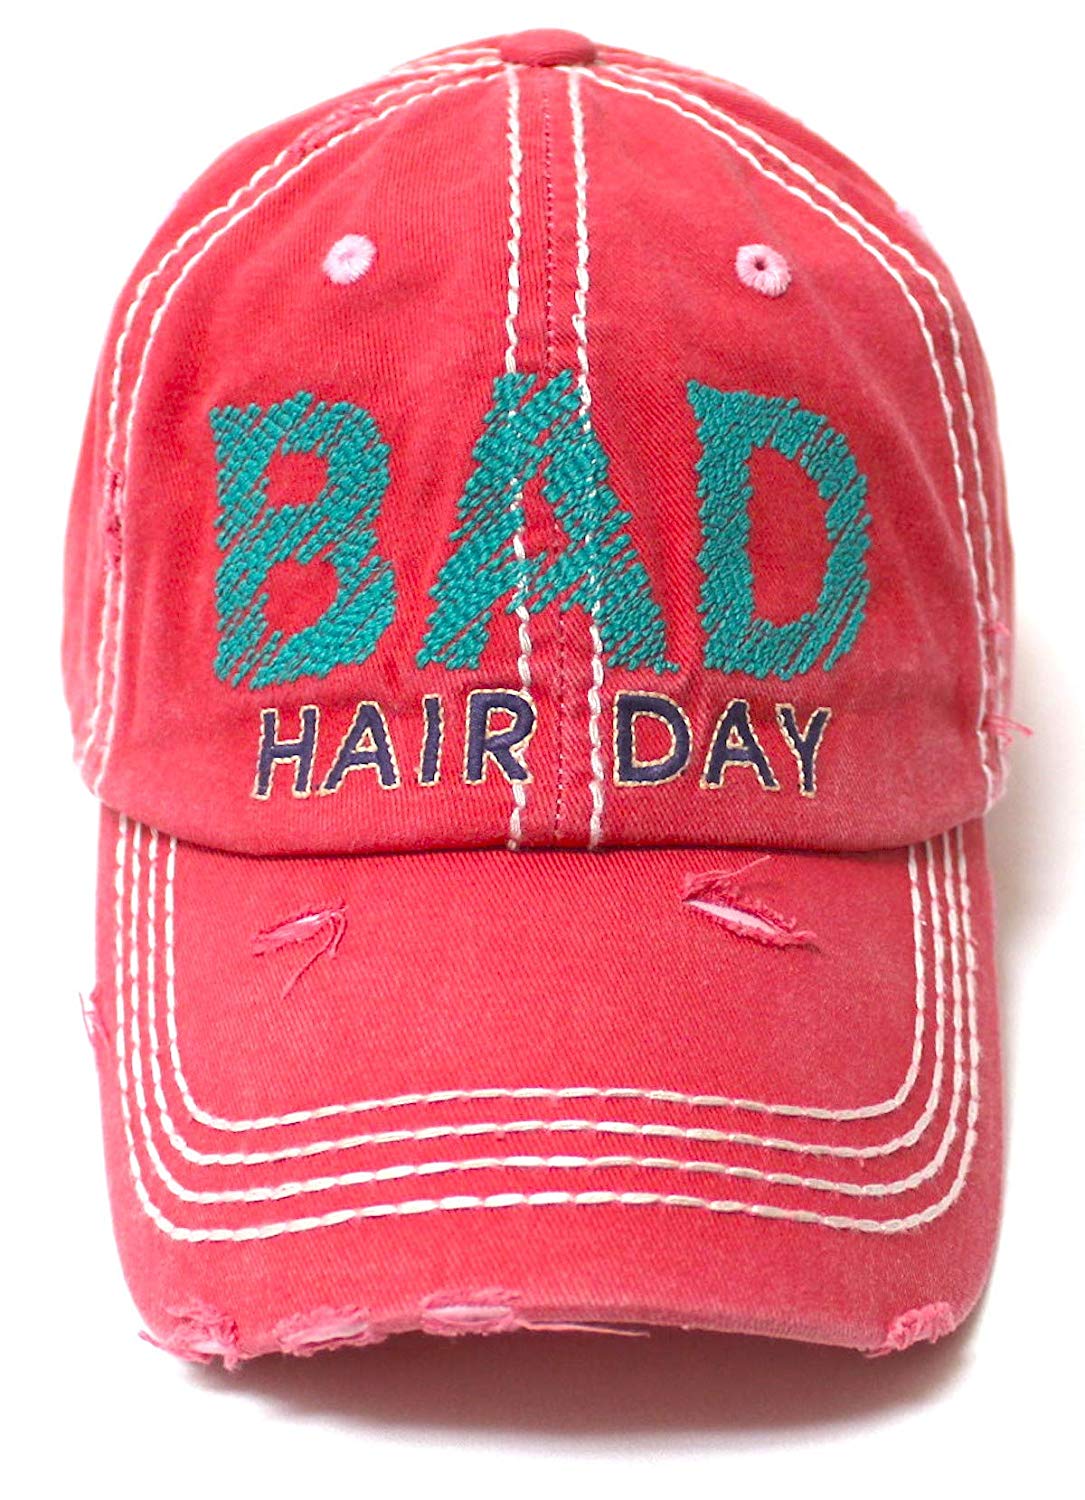 Women's Classic Ball Cap Bad Hair Day Stitch Embroidery Distressed Beach Hat, Coral Pink - Caps 'N Vintage 